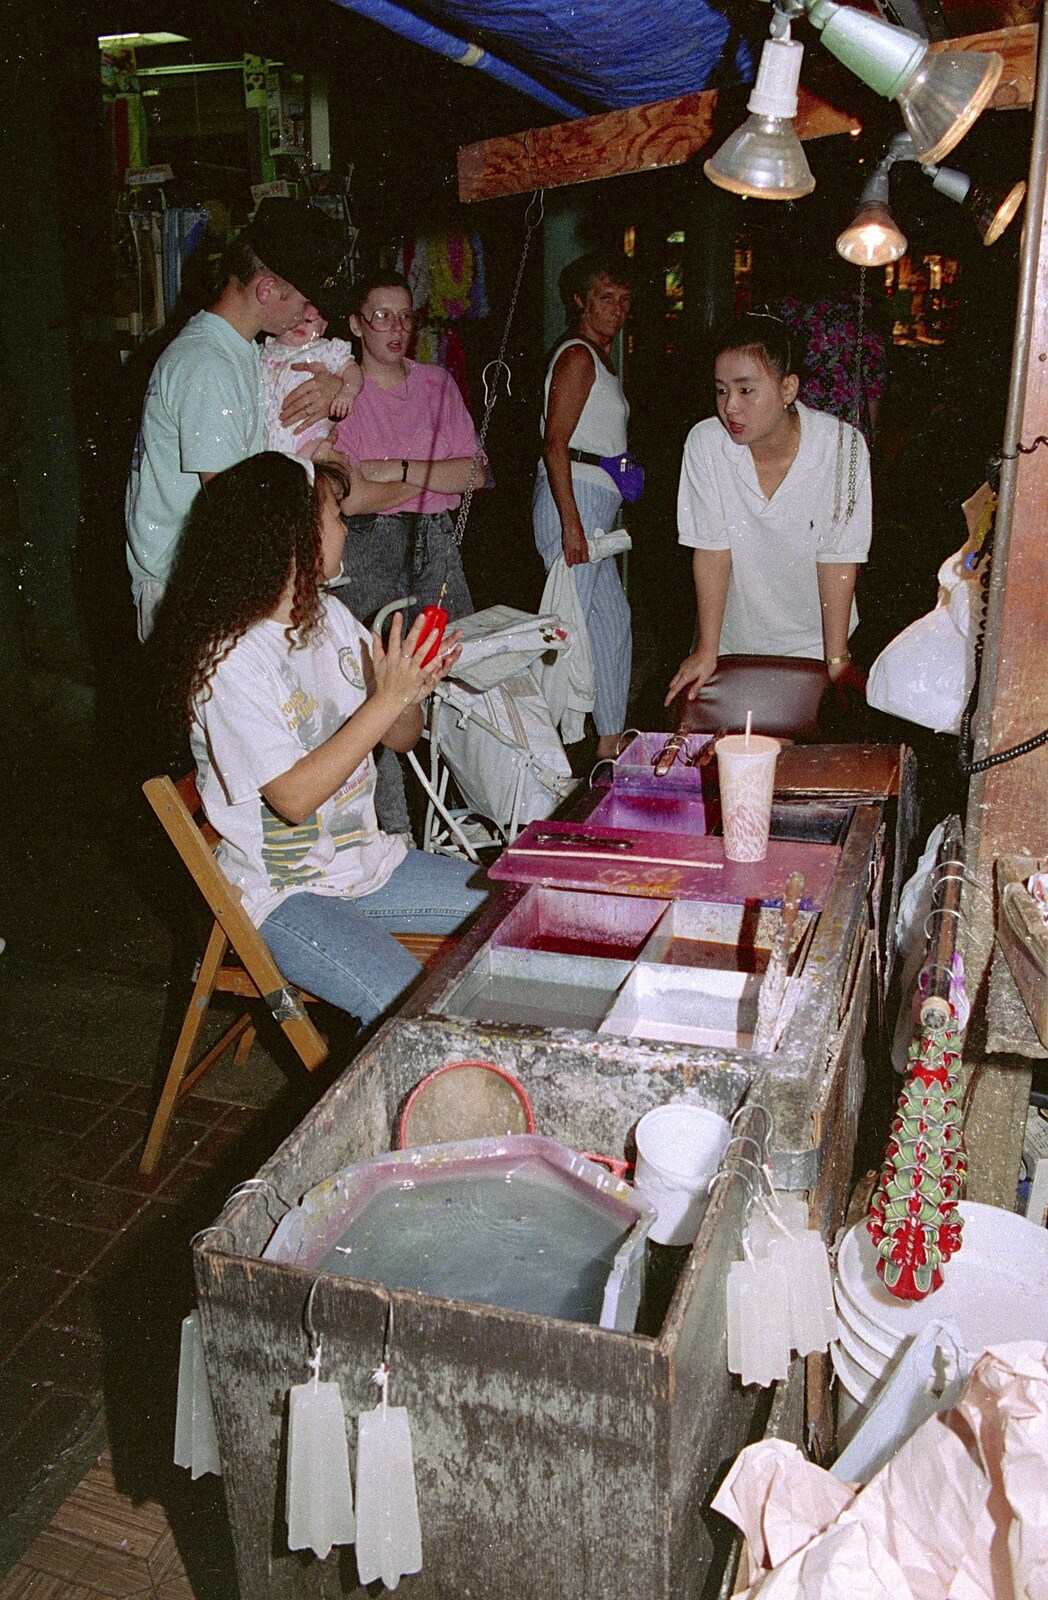 A candle-making stall in the market from A 747 Cockpit, Honolulu and Pearl Harbor, O'ahu, Hawai'i, United States - 20th November 1992